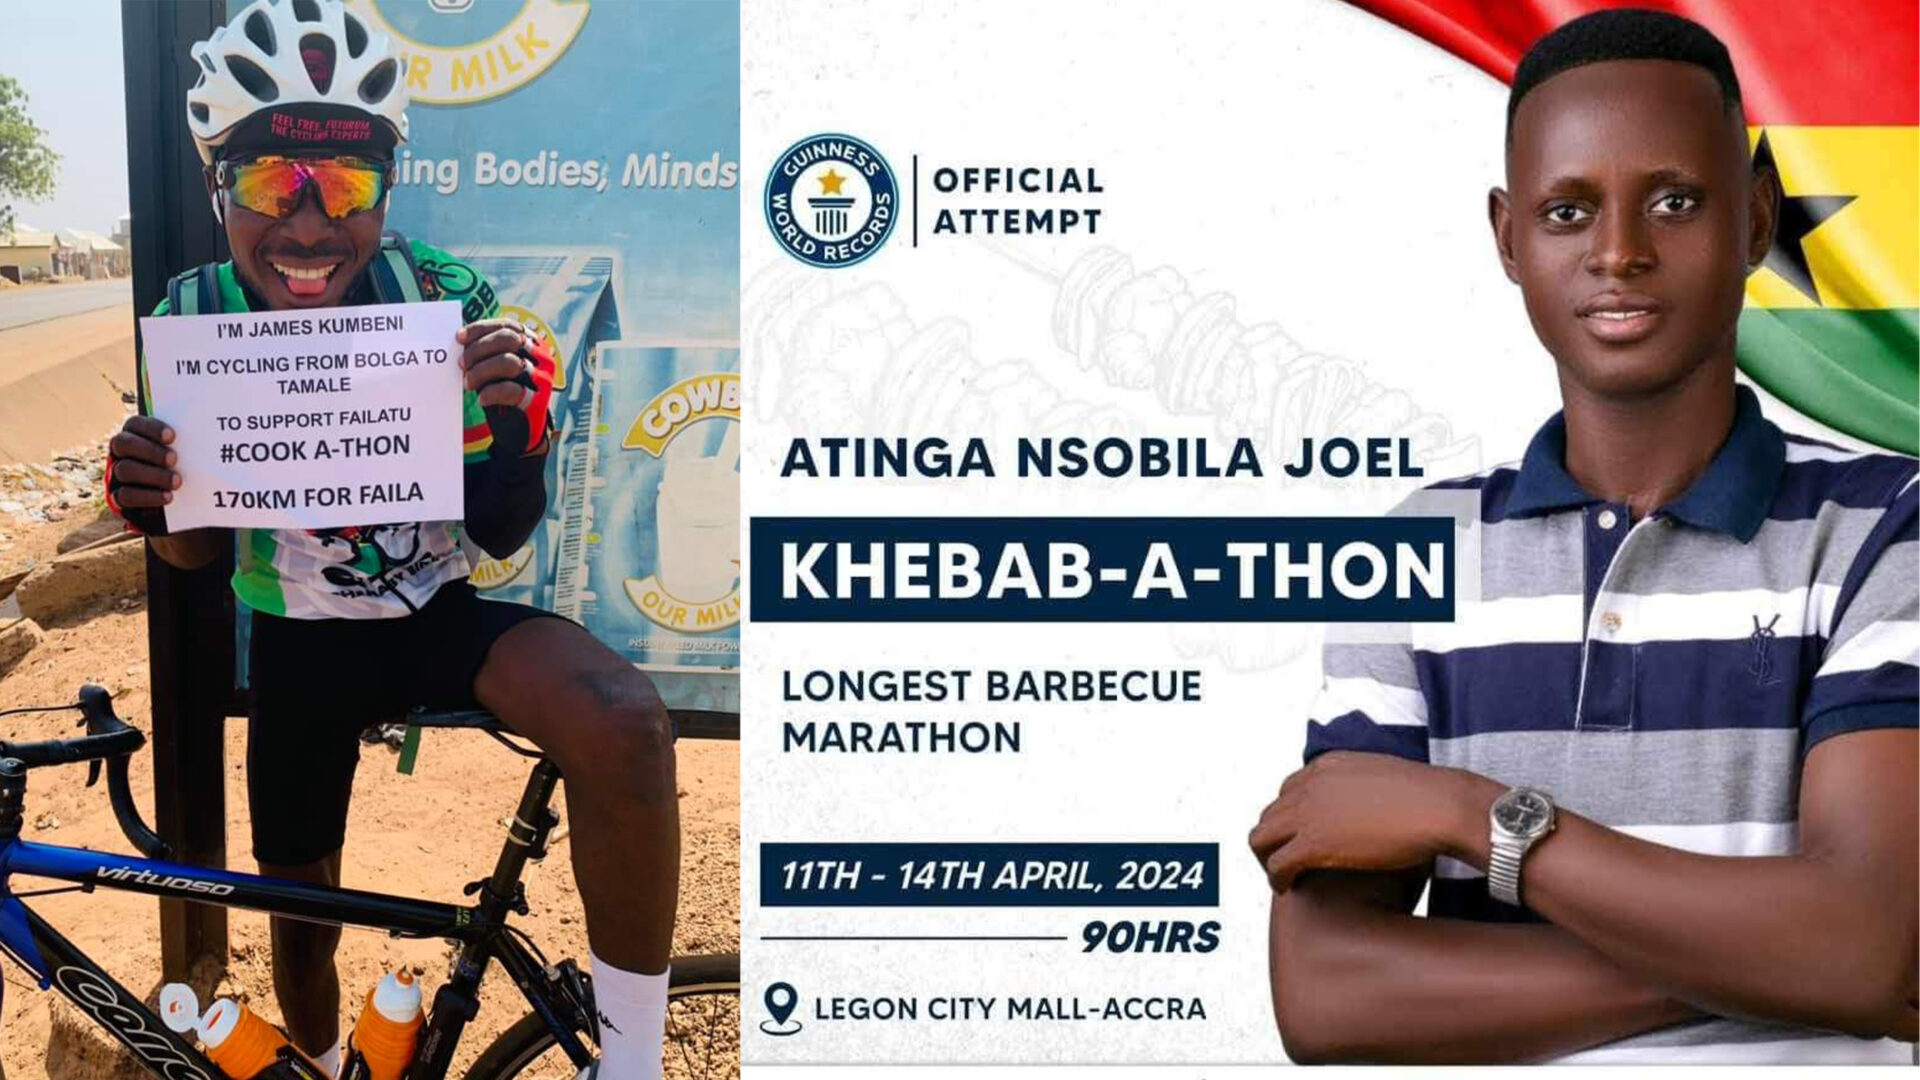 Cook-A-Thon to Khebab-A-Thon, James Kumbeni To Cycle From Bolga To Accra